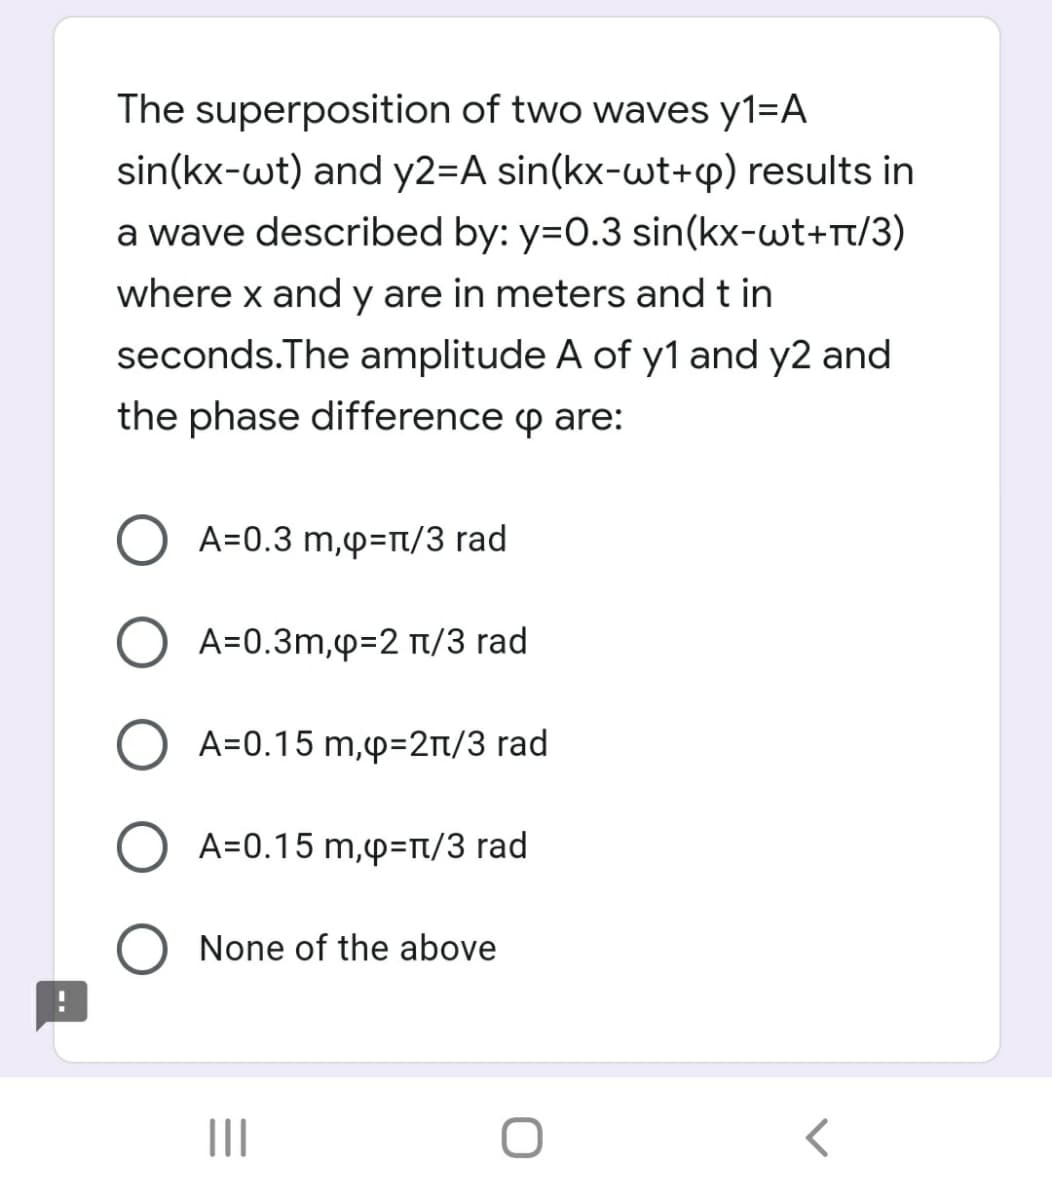 The superposition of two waves y1=A
sin(kx-wt) and y2=A sin(kx-wt+cp) results in
a wave described by: y=0.3 sin(kx-wt+rt/3)
where x and y are in meters and t in
seconds.The amplitude A of y1 and y2 and
the phase difference p are:
O A=0.3 m,p=rt/3 rad
A=0.3m,p=2 t/3 rad
O A=0.15 m,p=2t/3 rad
O A=0.15 m,p=t/3 rad
None of the above
II
